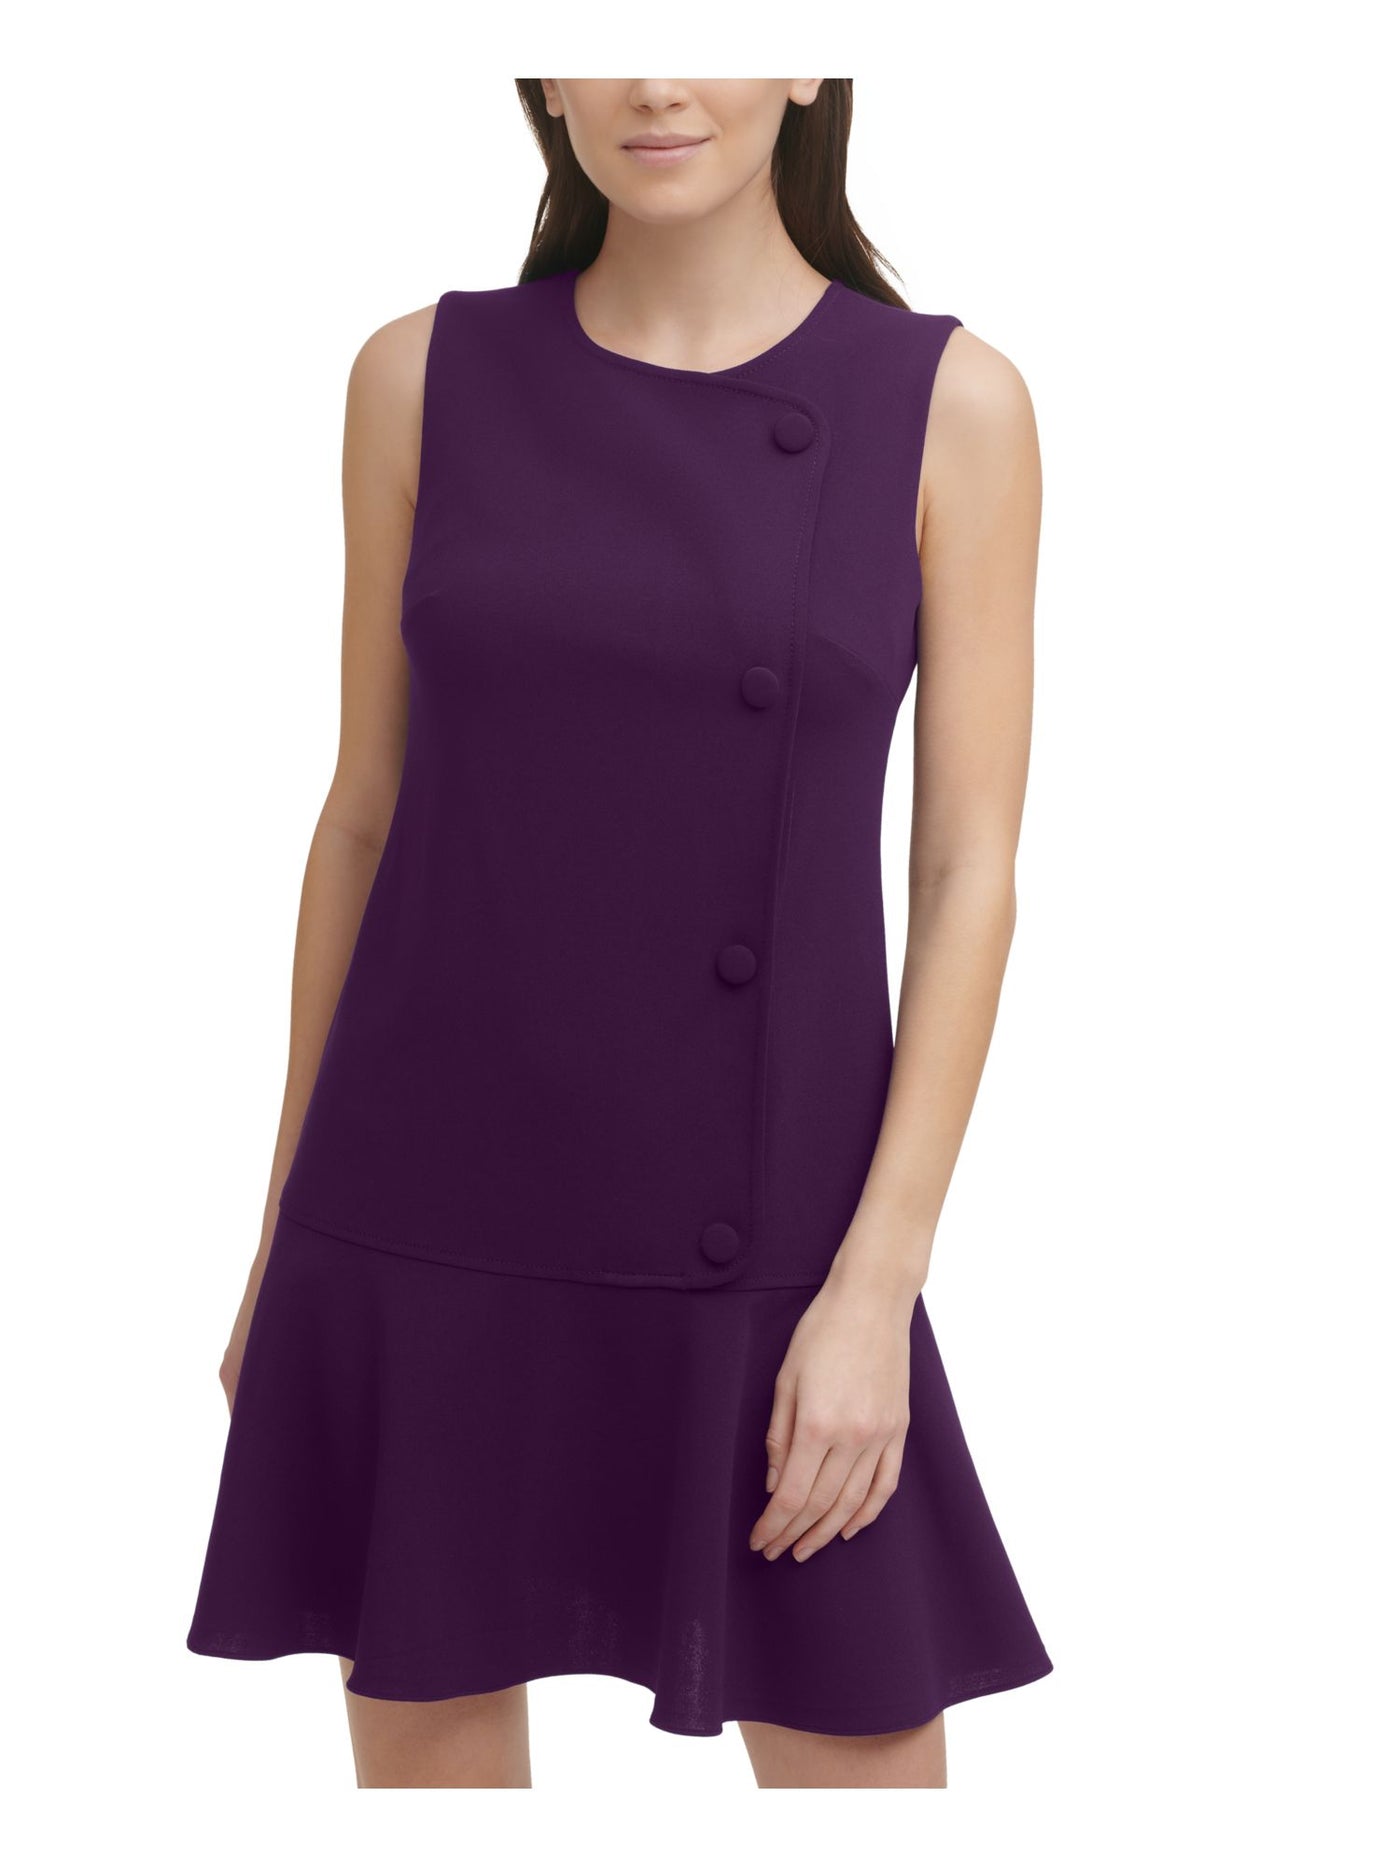 DKNY Womens Purple Stretch Zippered Fitted Faux Button Sleeveless Round Neck Short Wear To Work Drop Waist Dress 4